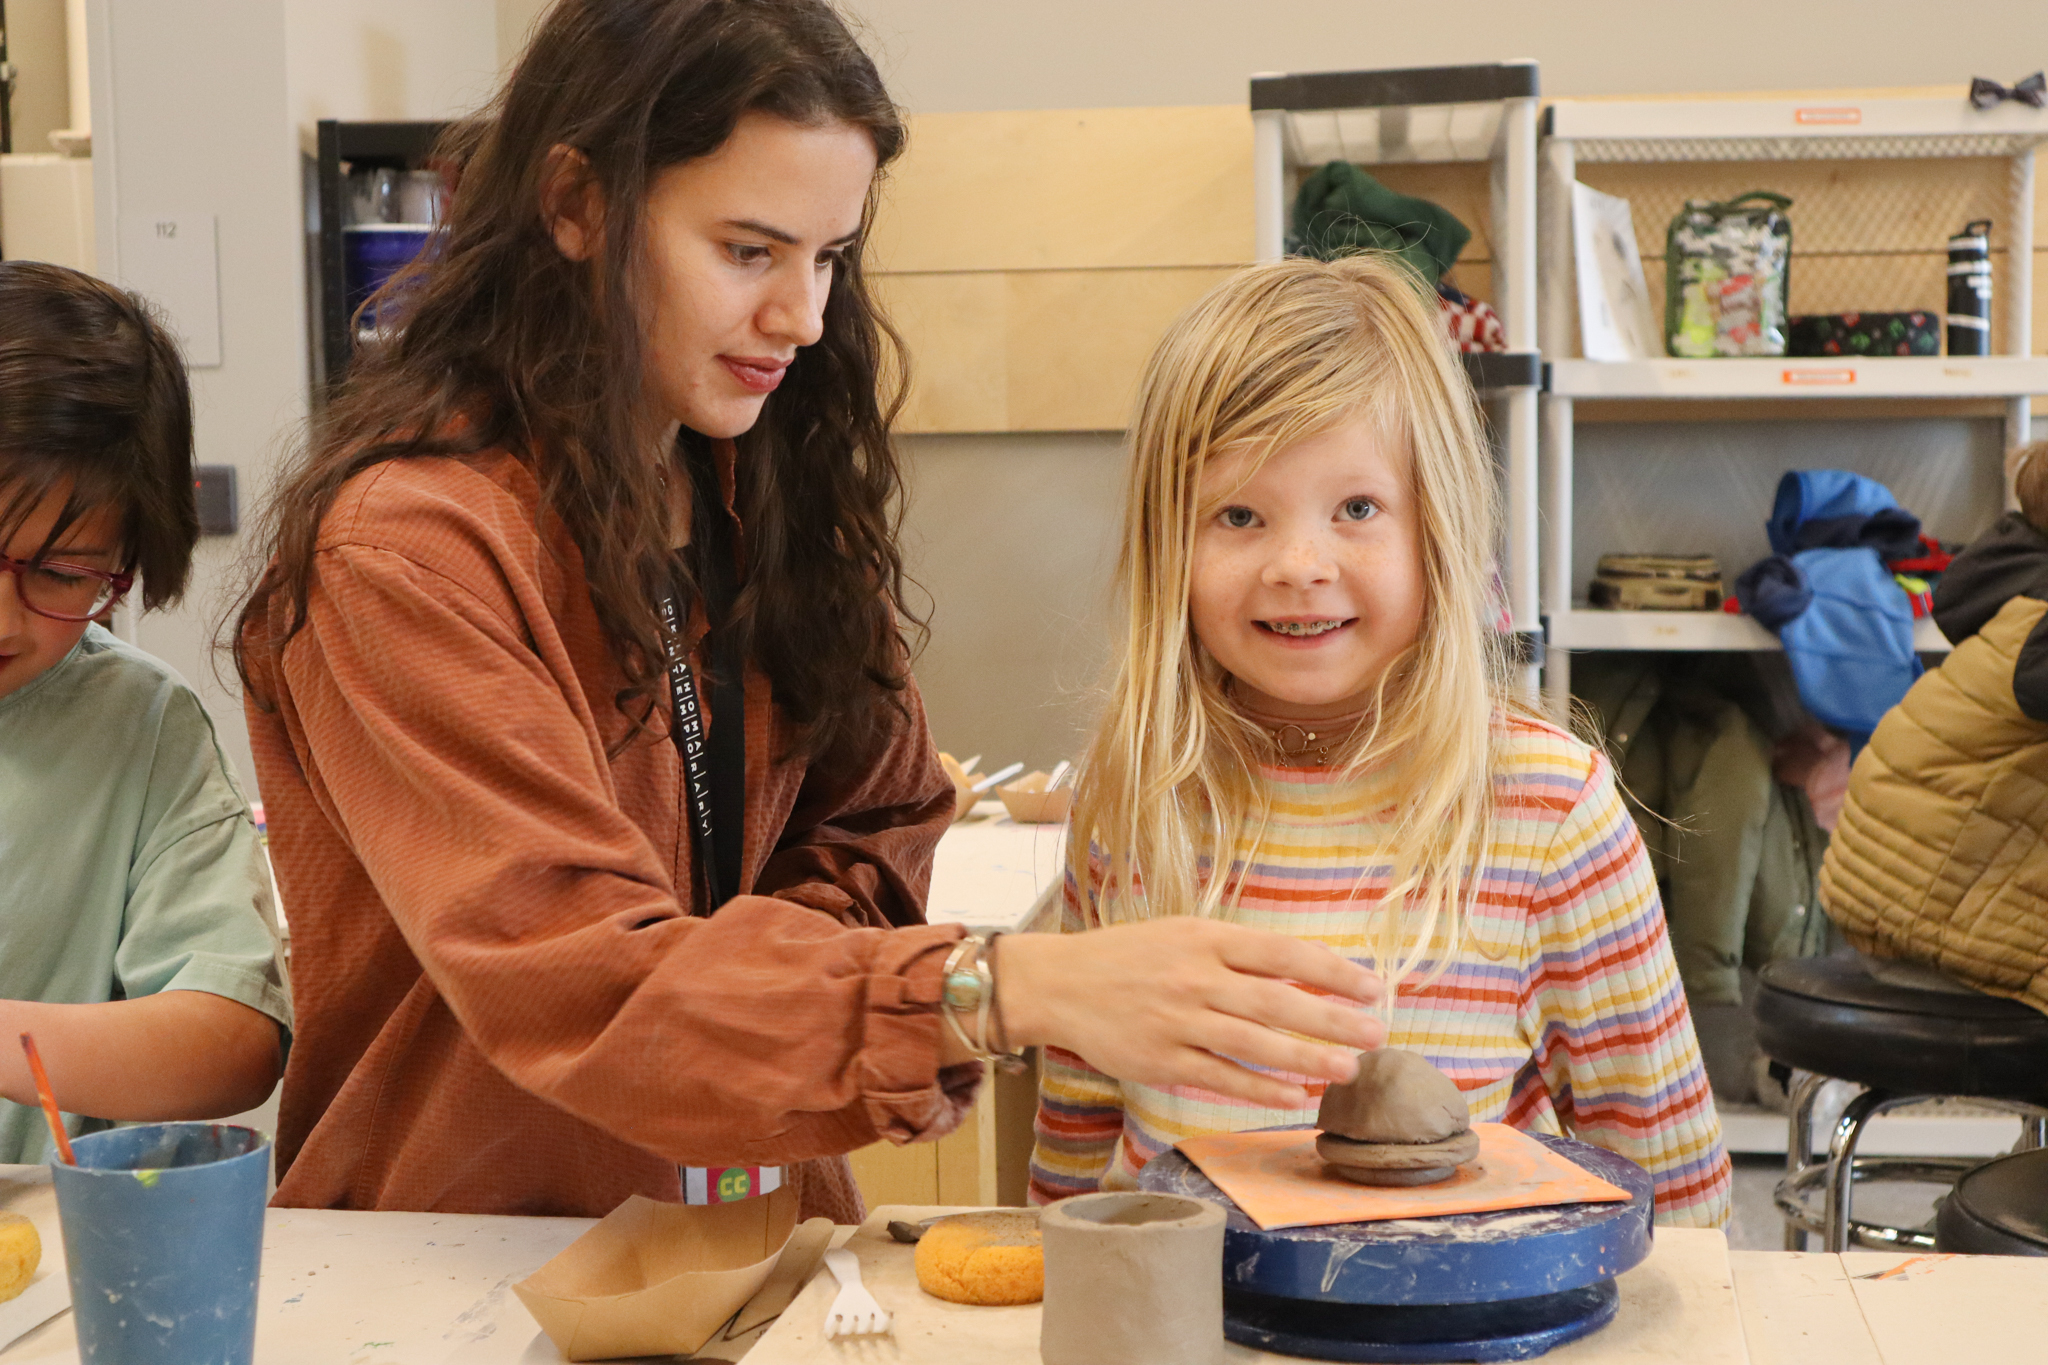 A person in a red-brown jacket with dark hair is helping a young kid with clay. The child has blonde hair is looking at the camera, smiling with braces, and is wearing a striped colorful shirt.